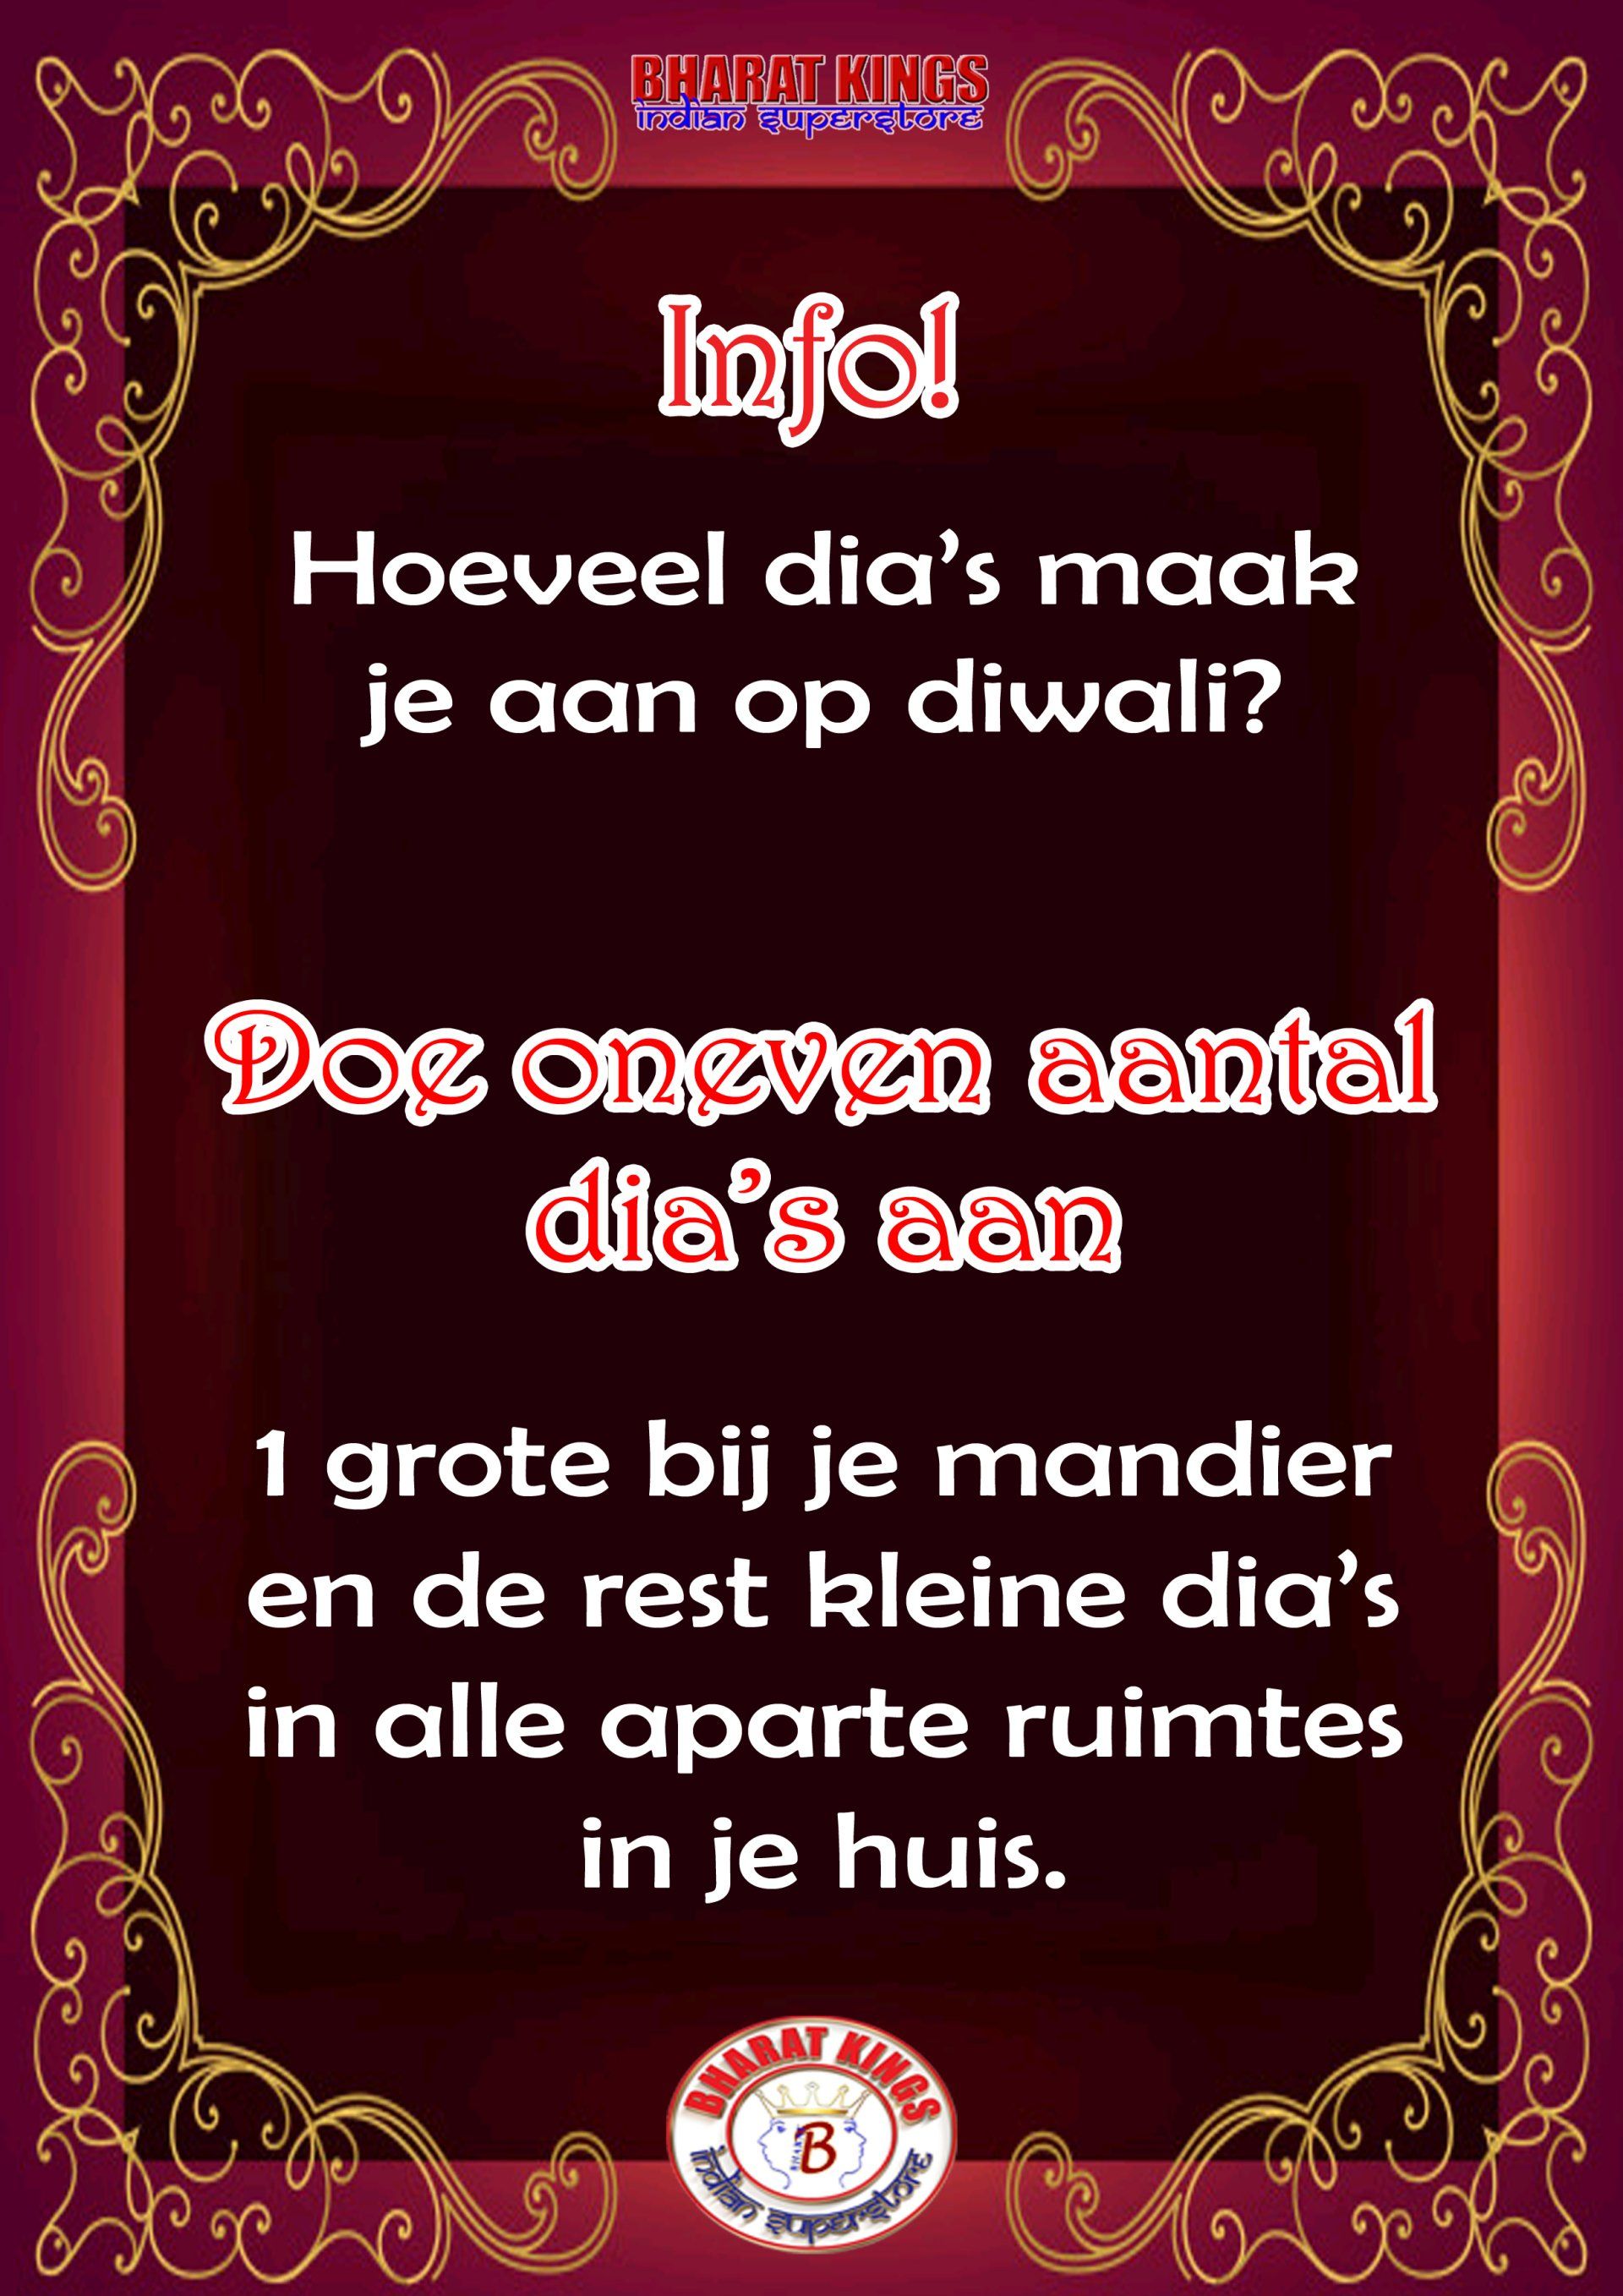 A poster in a foreign language that says ' hoeveel dia 's maak je aan op diwali '